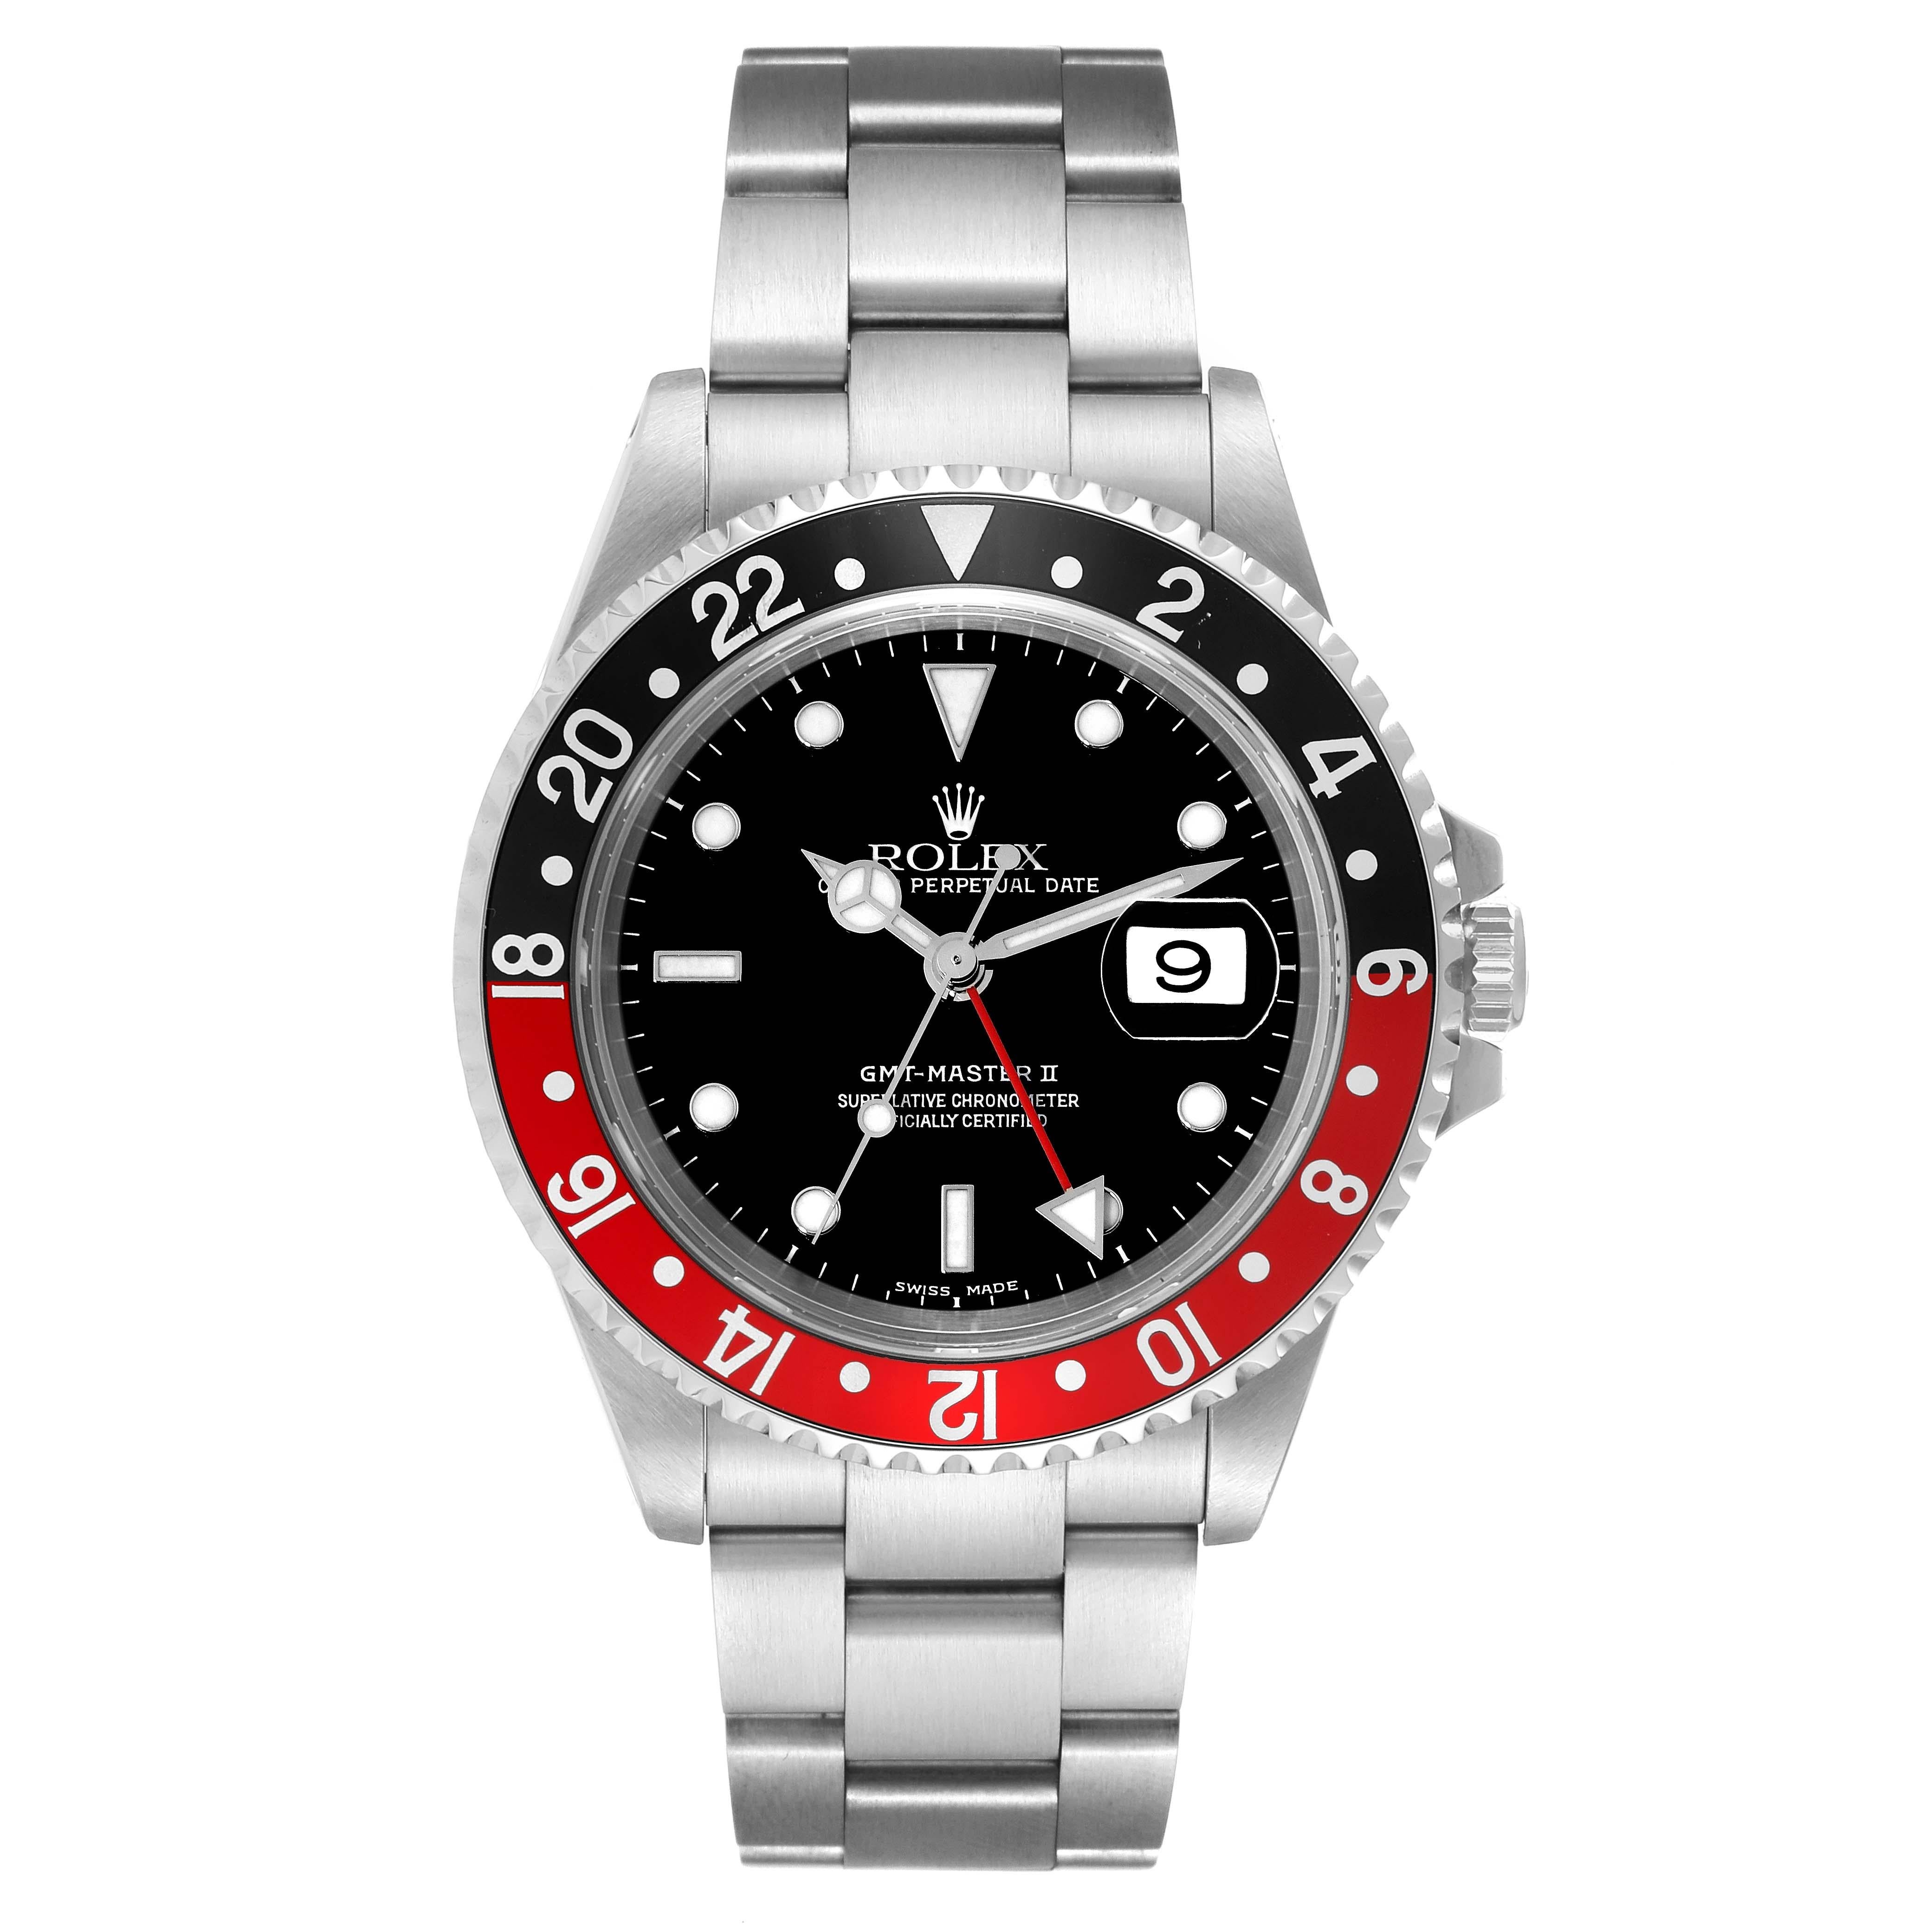 Rolex GMT Master II Black Red Coke Bezel Steel Mens Watch 16710 Box Papers. Officially certified chronometer automatic self-winding movement. Stainless steel case 40 mm in diameter. Rolex logo on the crown. Stainless steel bi-directional rotating